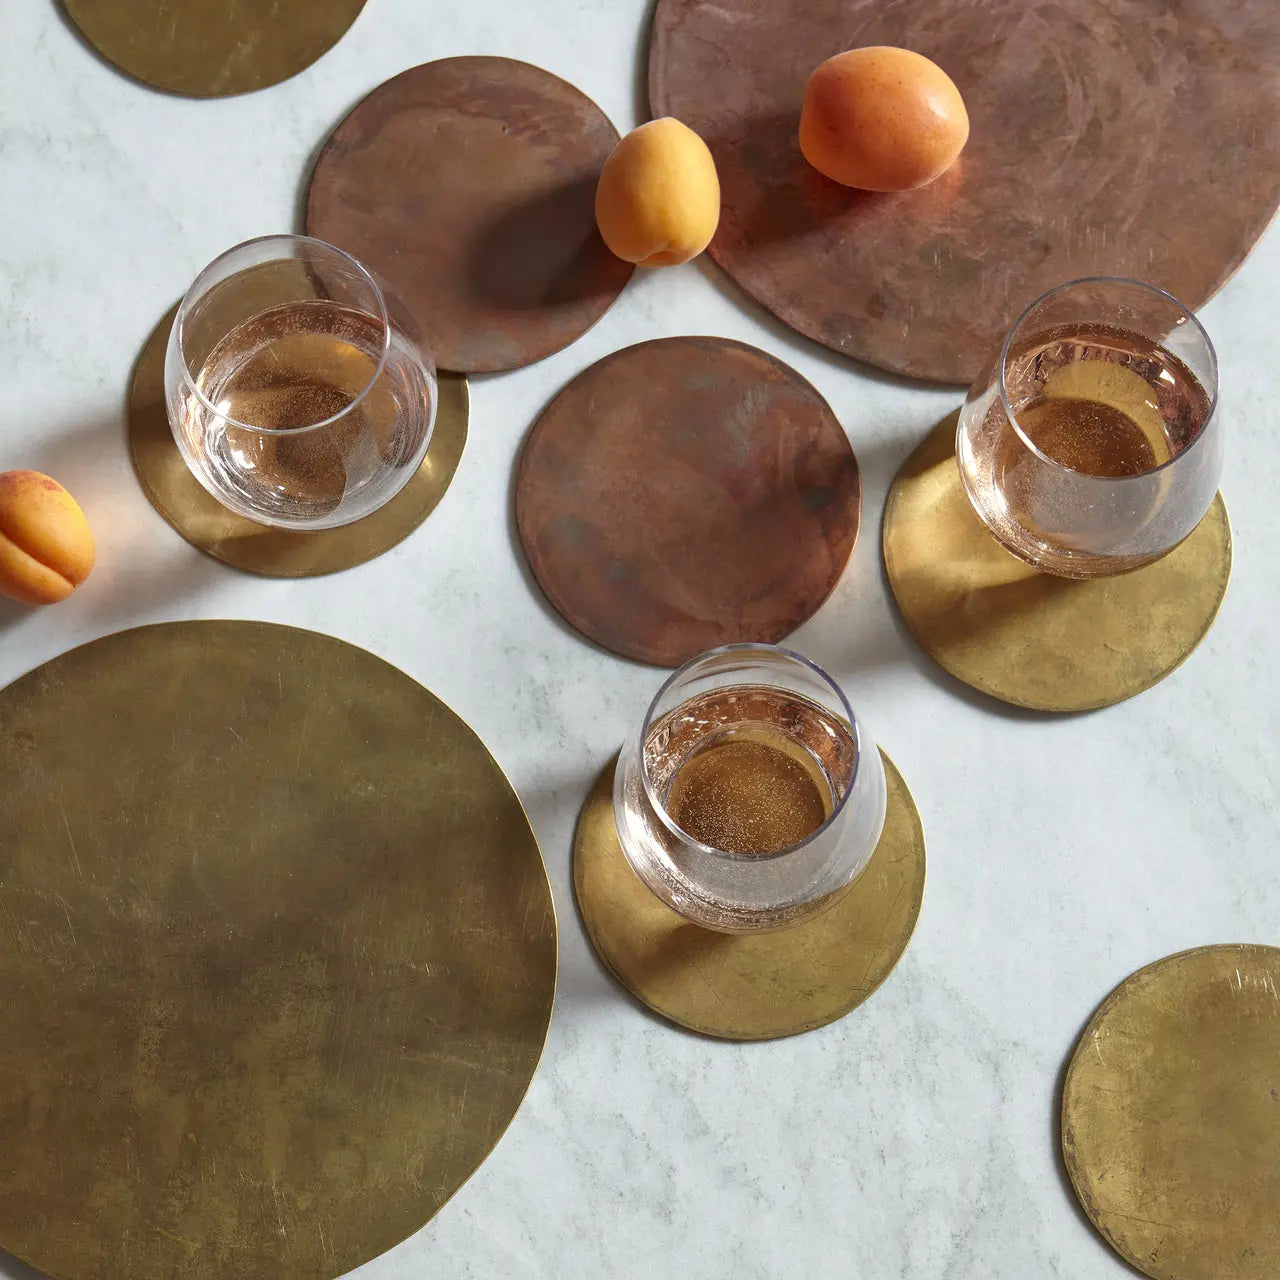 Shop Stunning Solid Brass, Copper, or Nickel Coasters - Perfect for  Entertaining